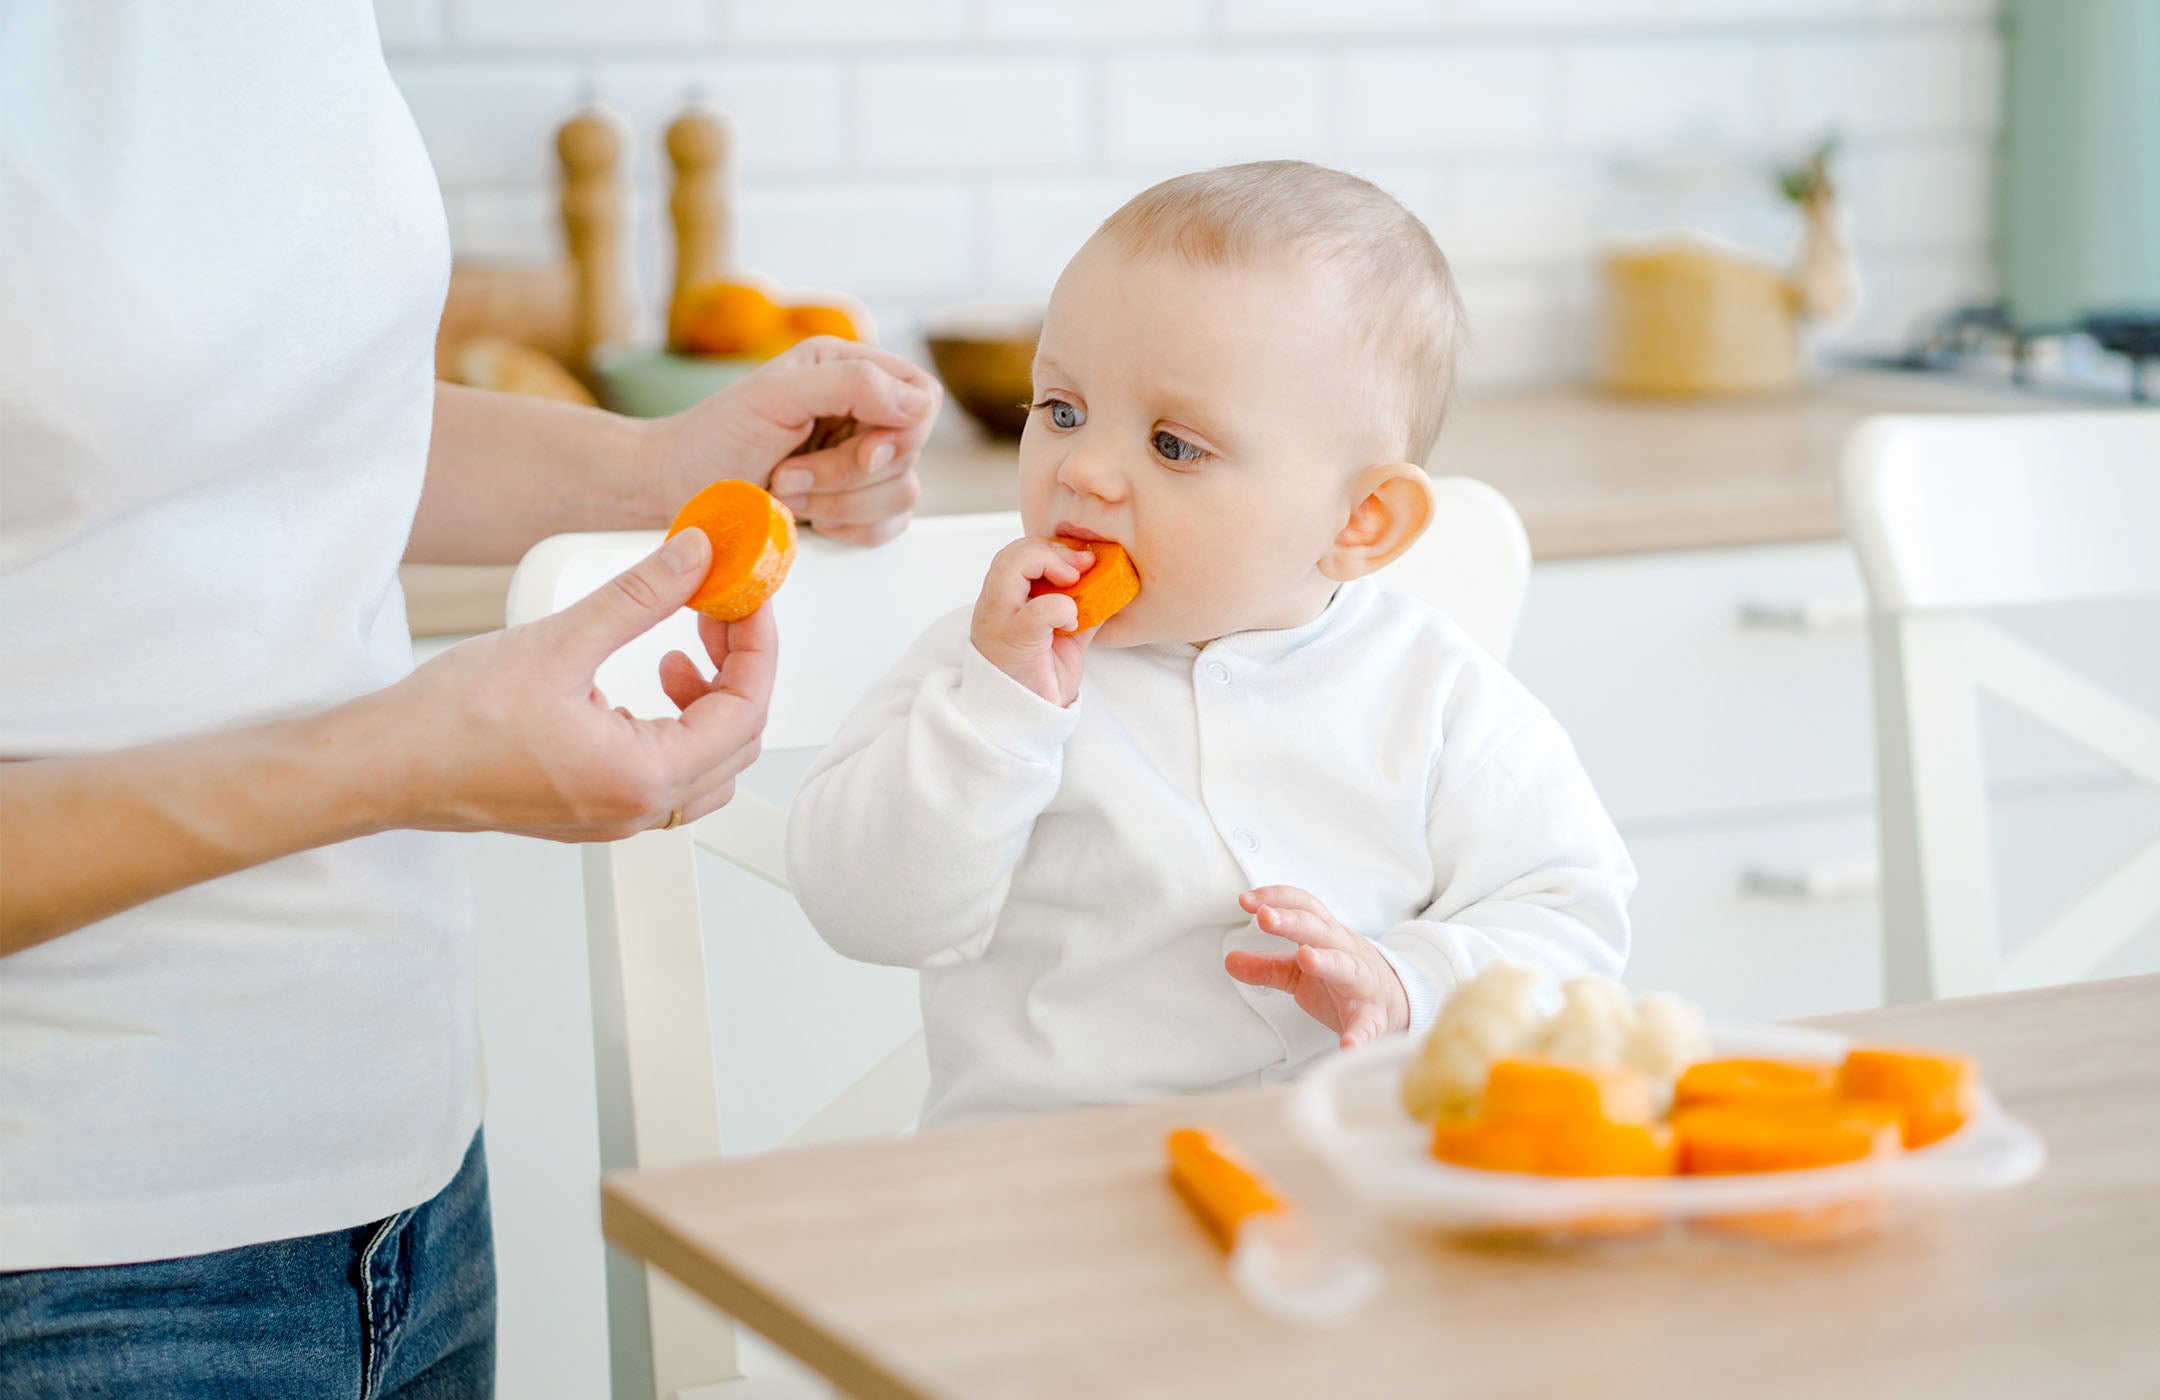 When Can Babies Have Finger Foods